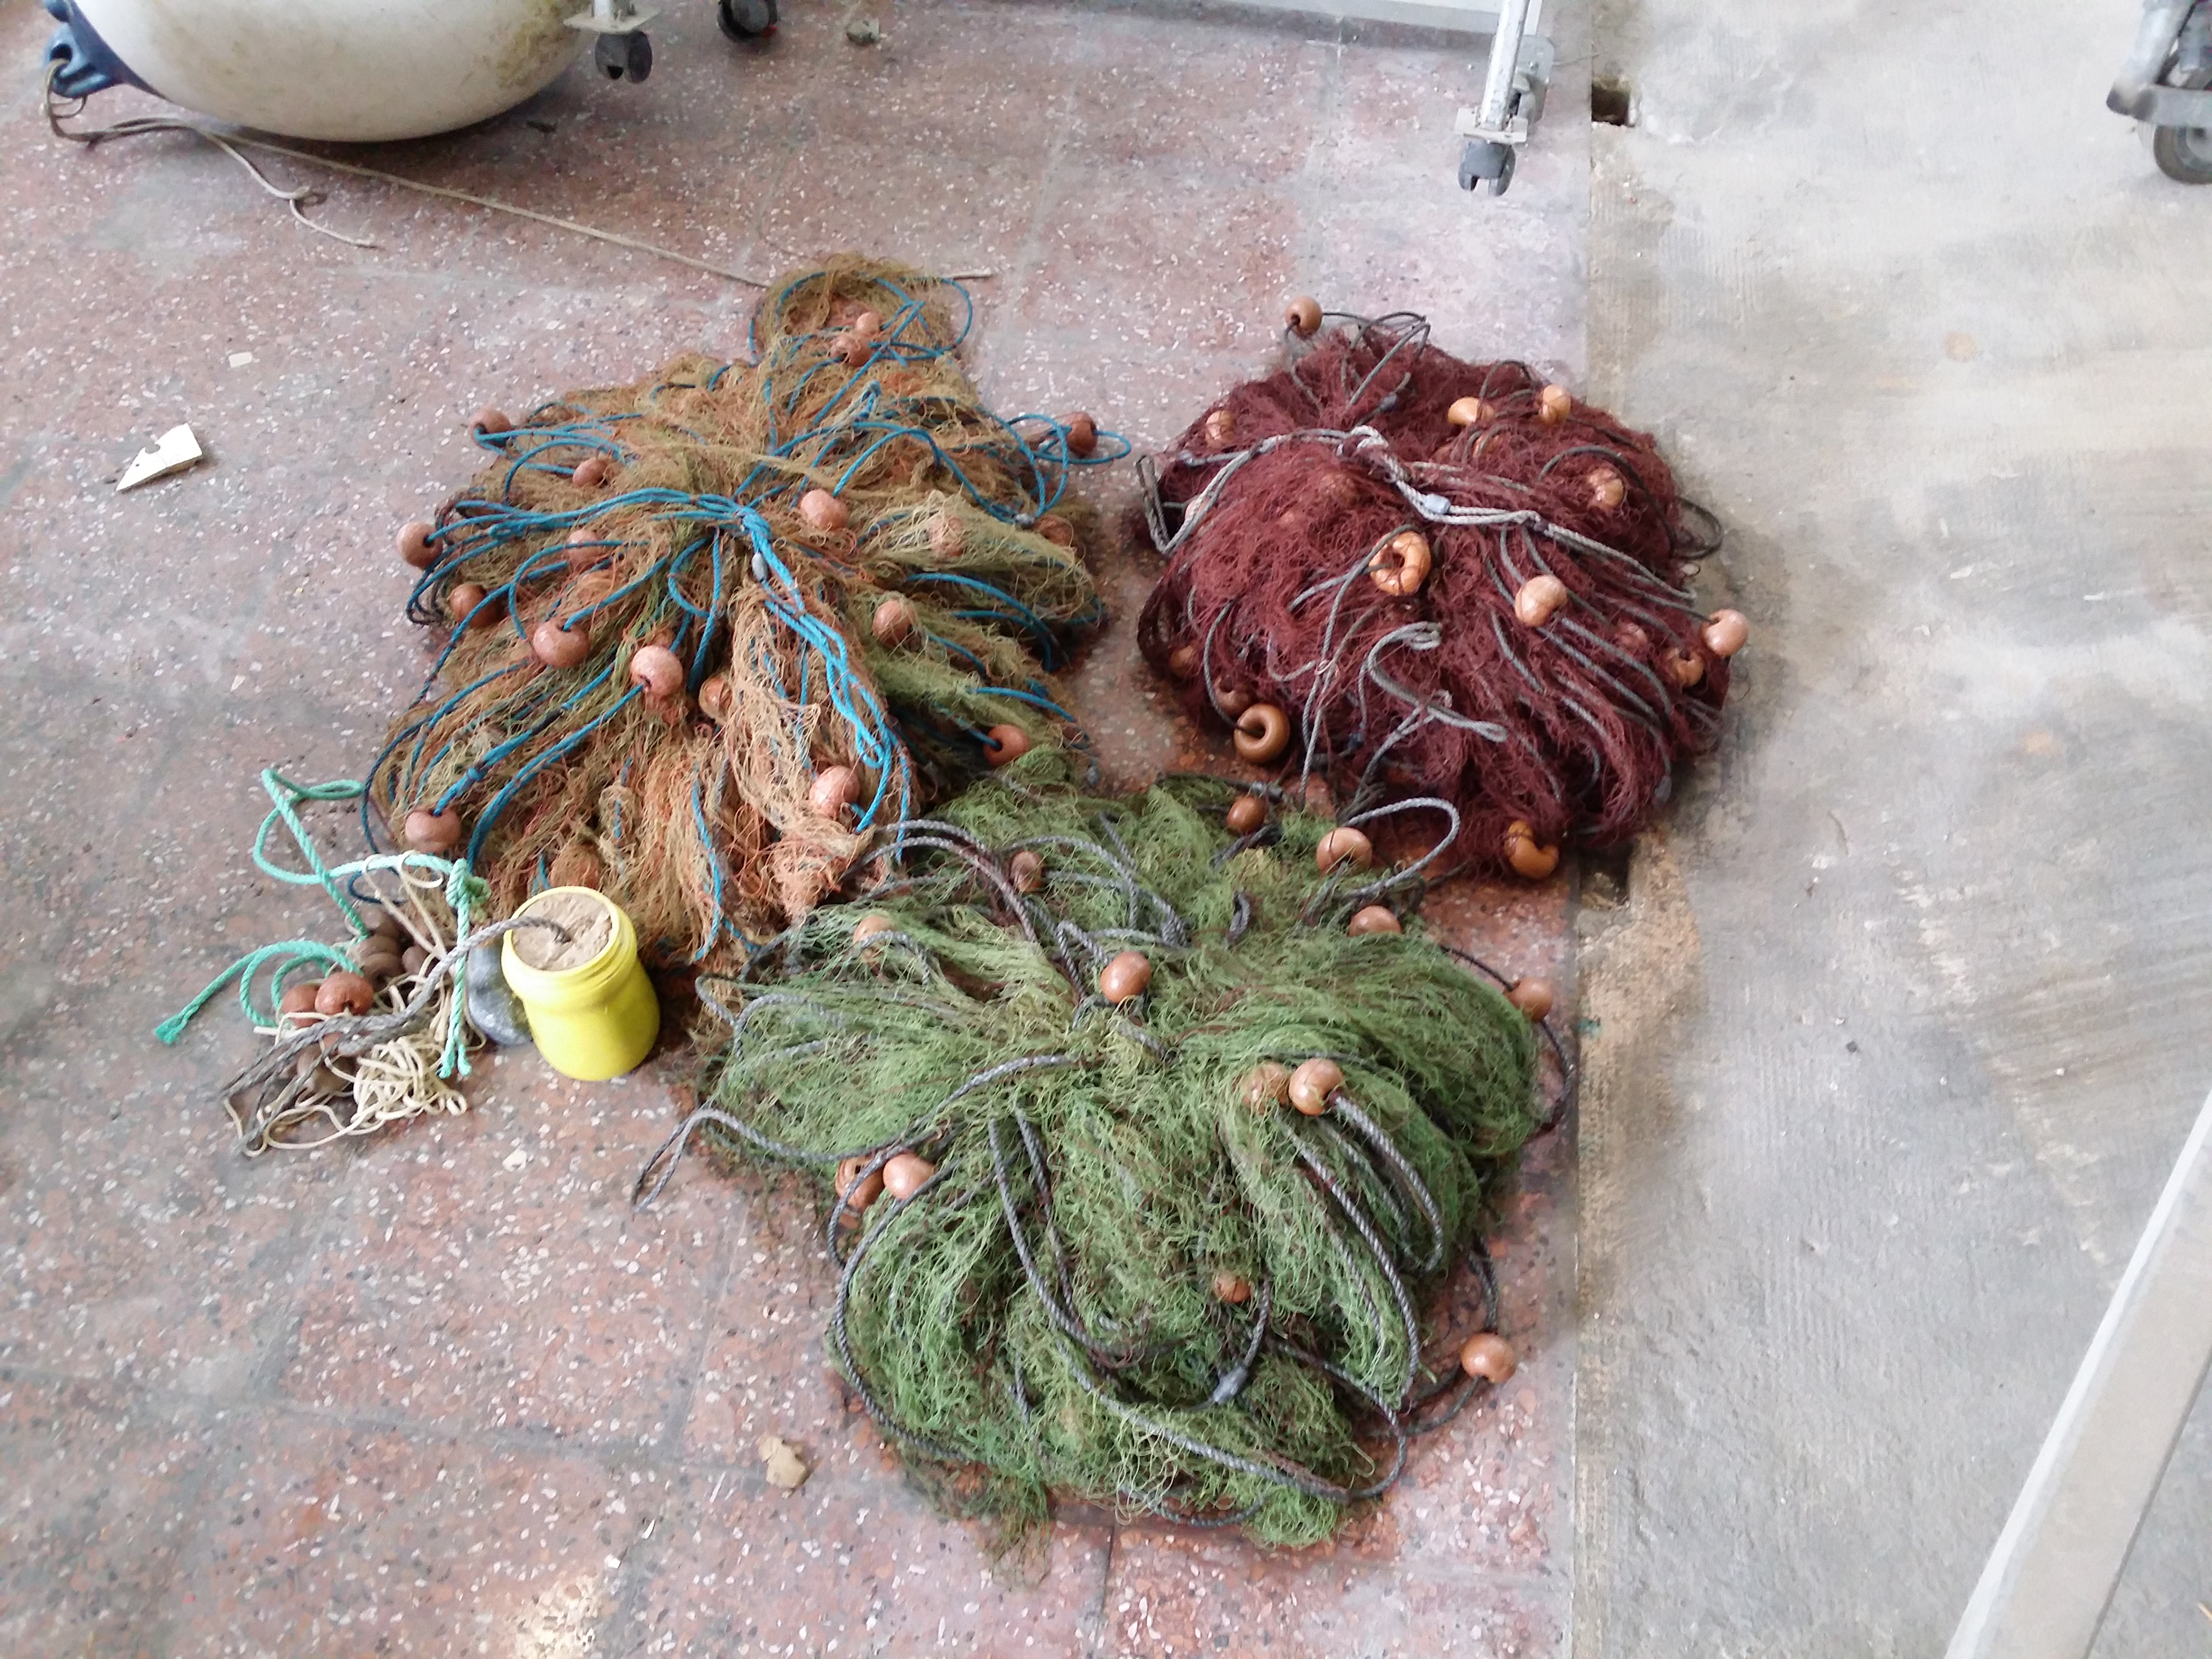 Maó Port Police seized hundred meters illegal fishing nets.